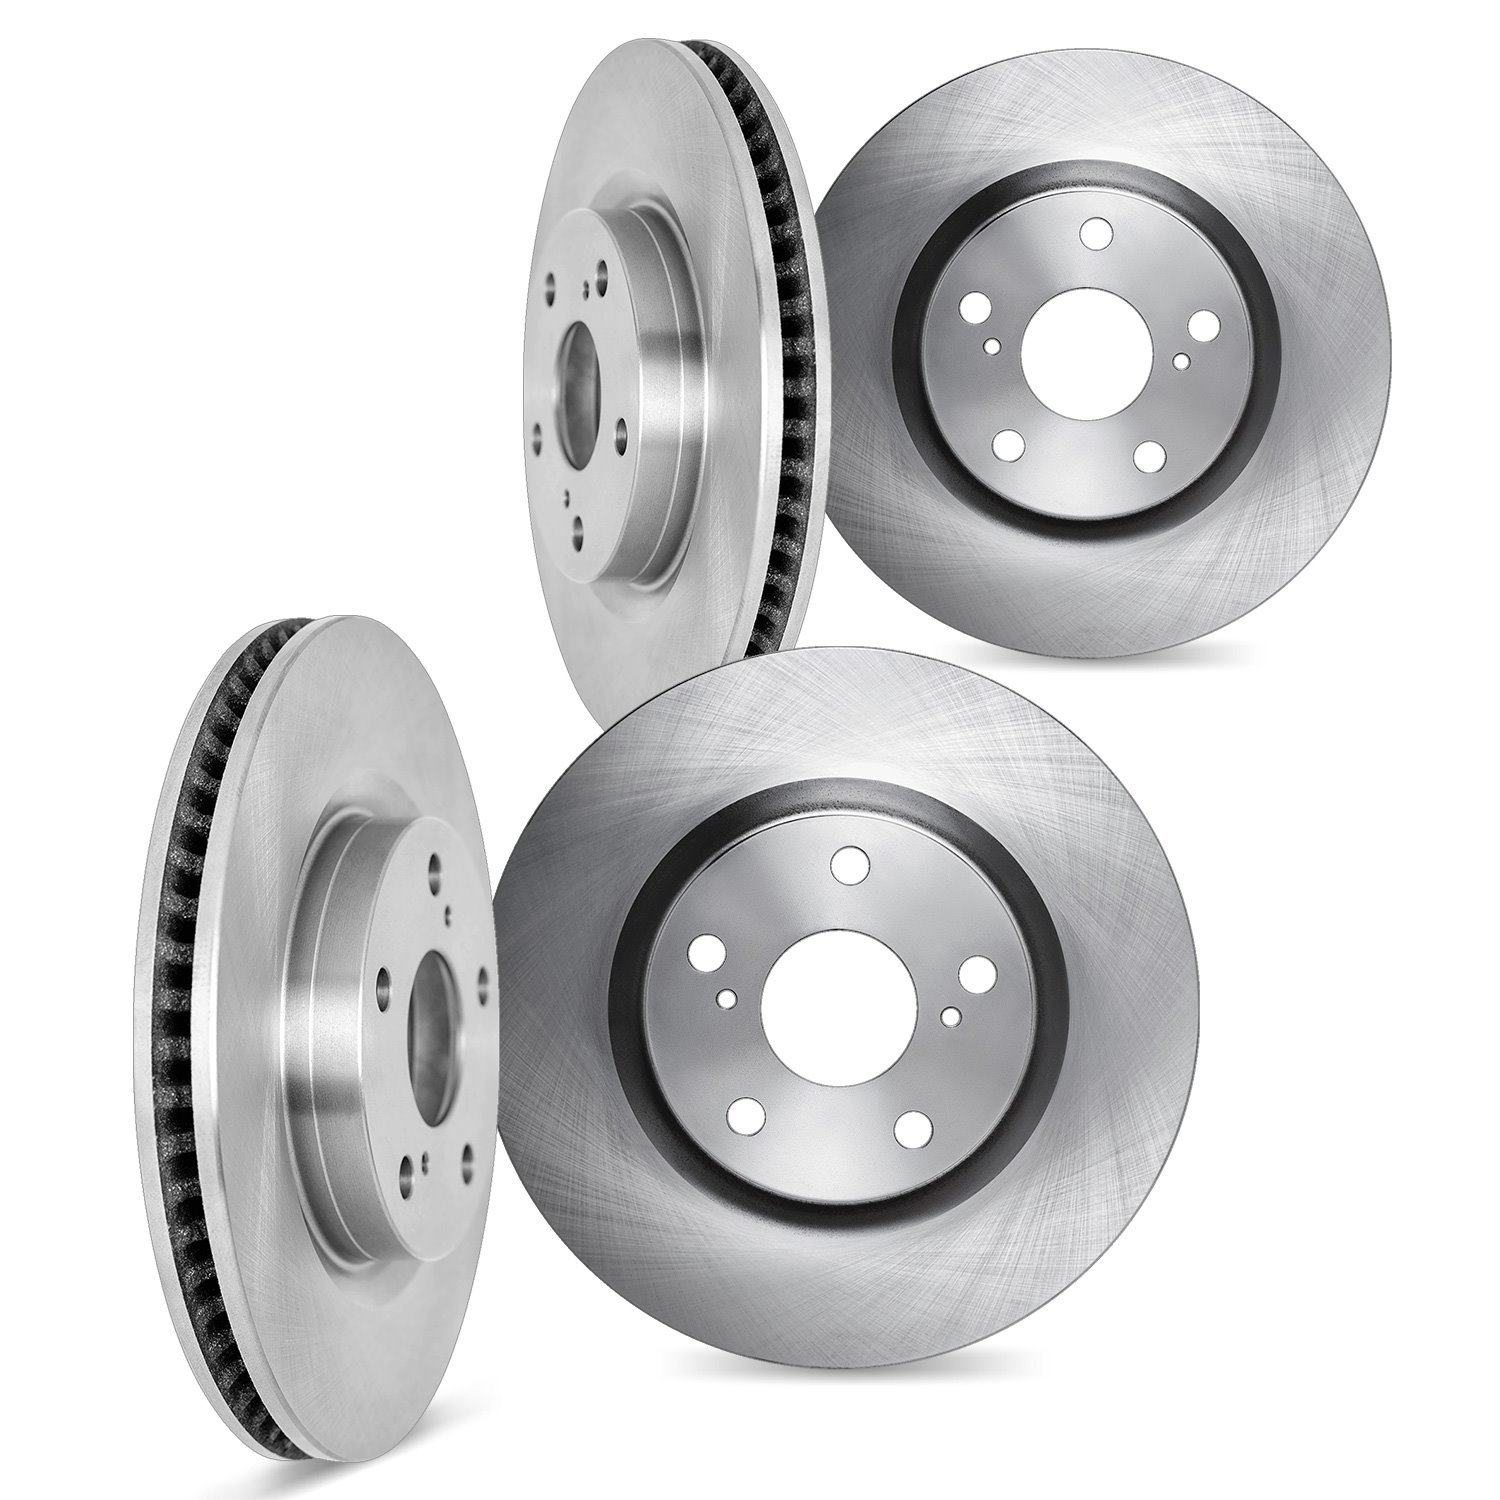 6004-54342 Brake Rotors, Fits Select Ford/Lincoln/Mercury/Mazda, Position: Front and Rear